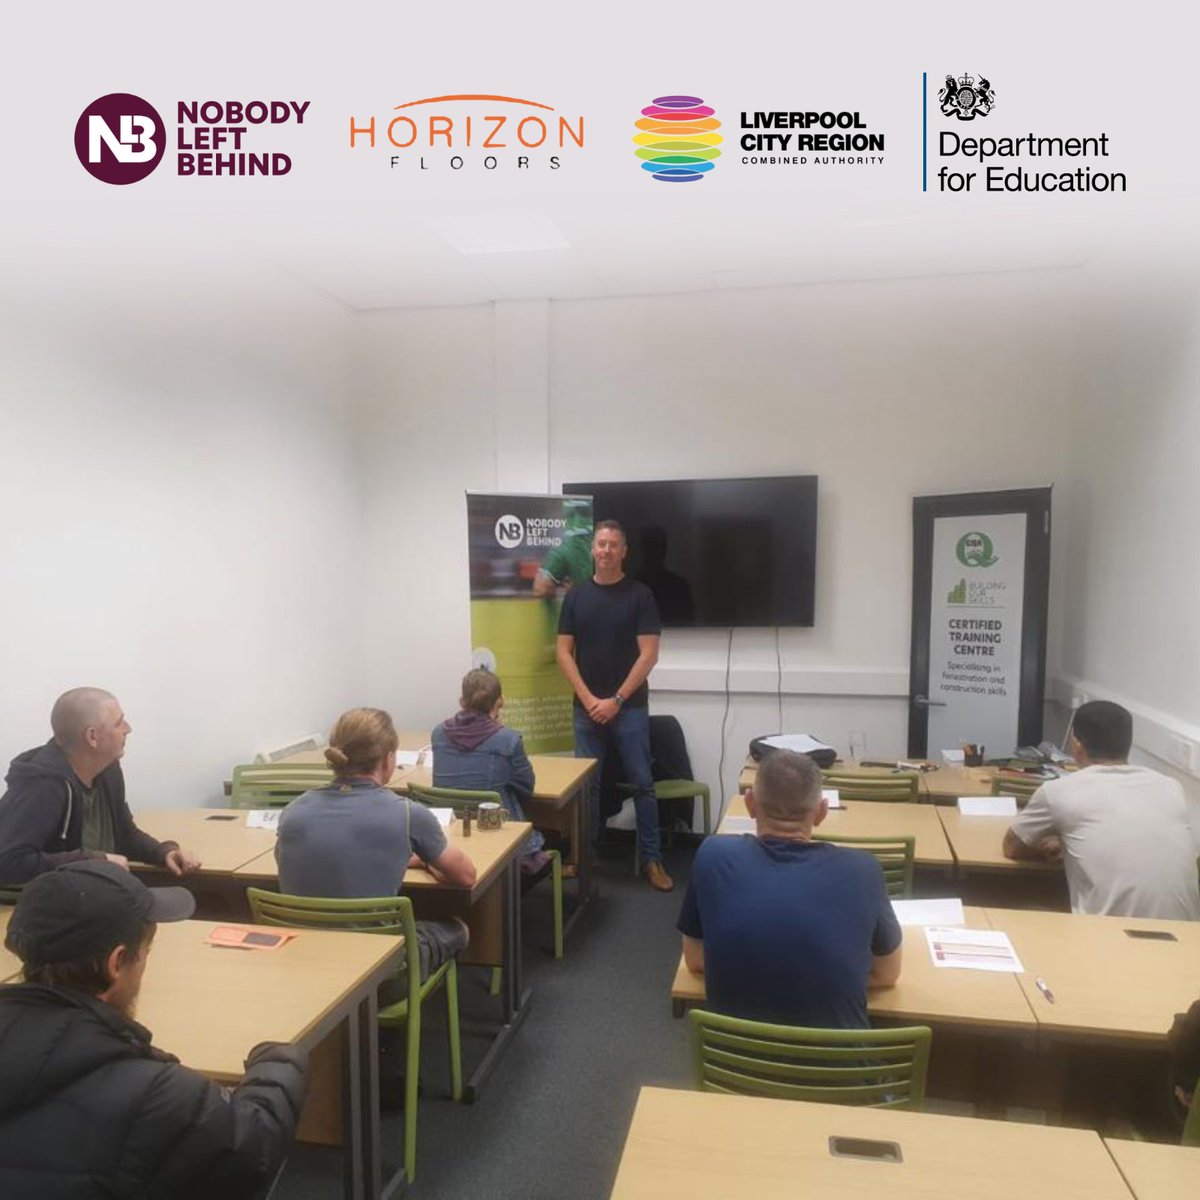 Today John, the Director of Knowsley firm Horizon Floors came in to speak to our current Bootcamp learners about opportunities within his business. They taken on NLB learners from almost one year ago, who have developed further and remain in employment with Horizon Floors.